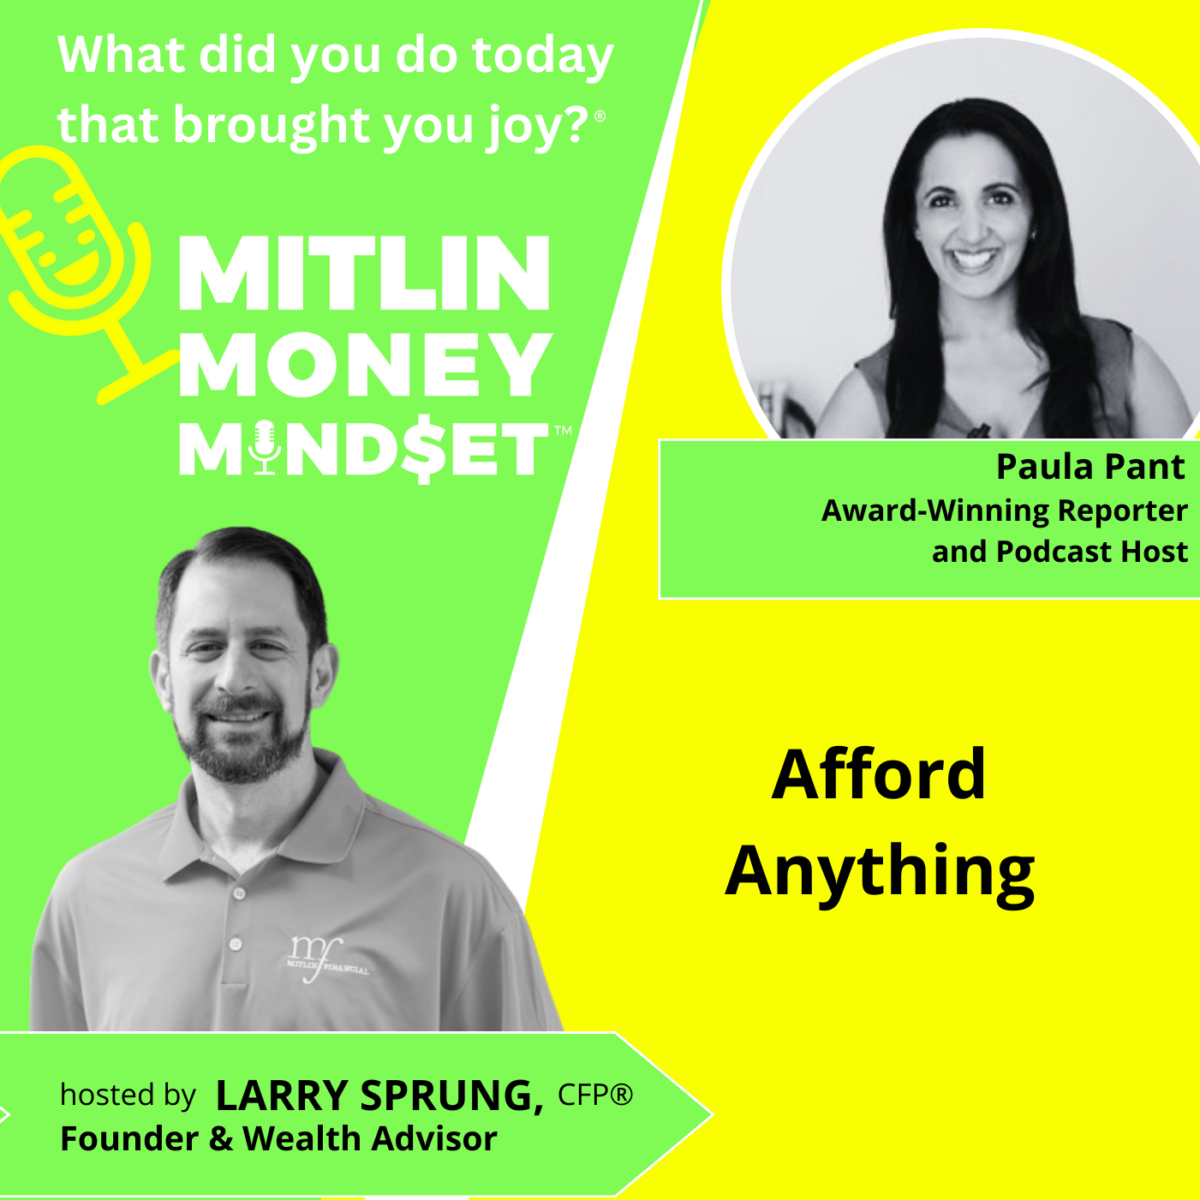 Afford Anything with Paula Pant, Episode #176